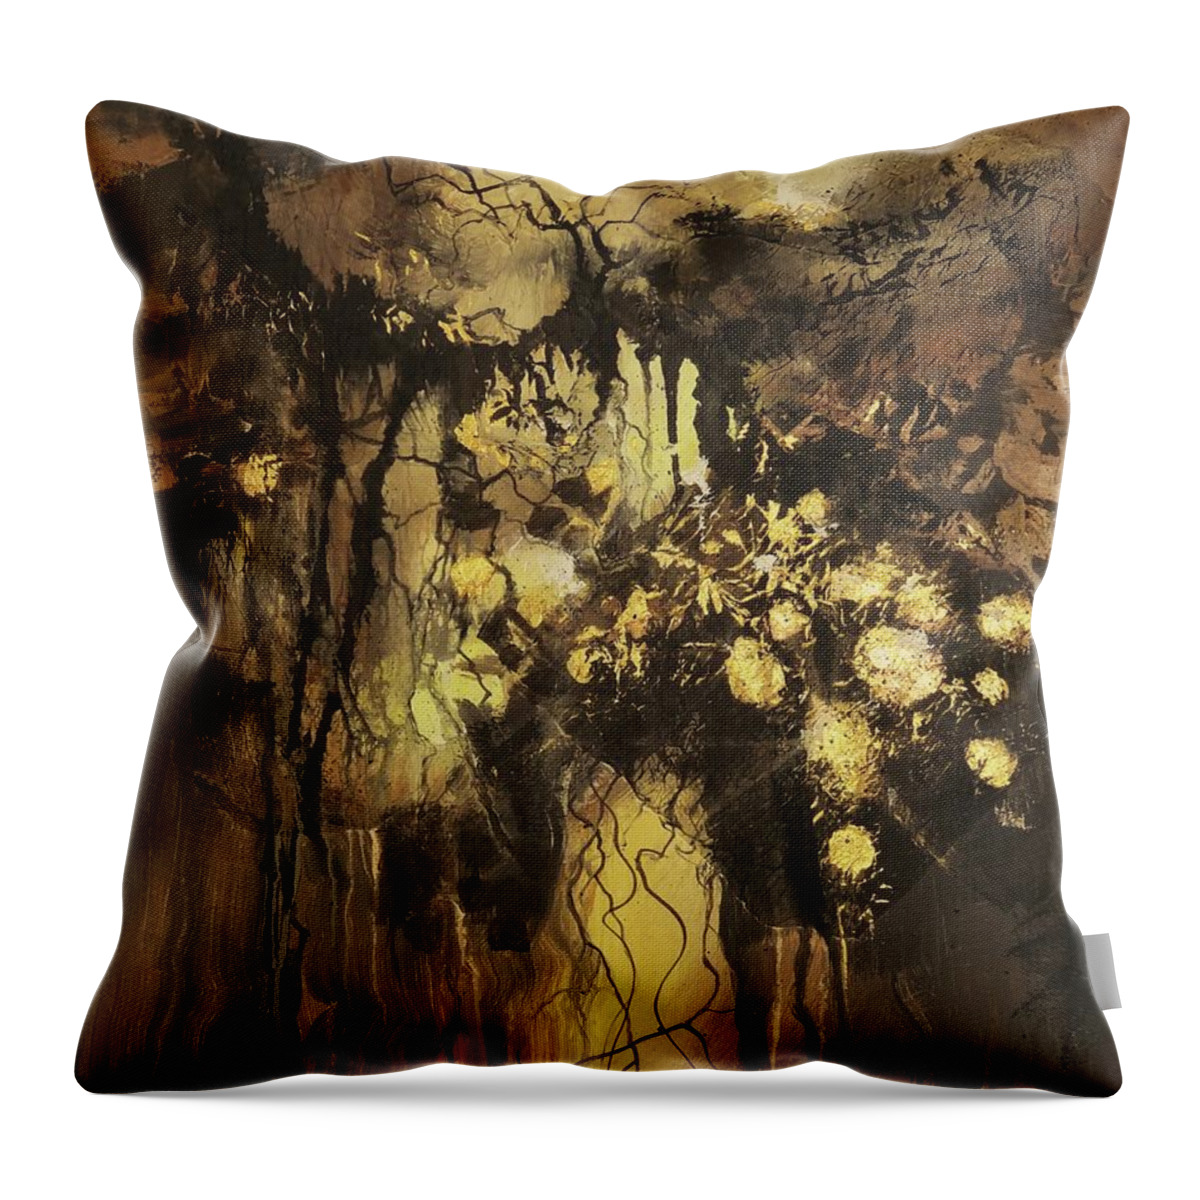 Abstract Throw Pillow featuring the painting Mother Lode by Tom Shropshire